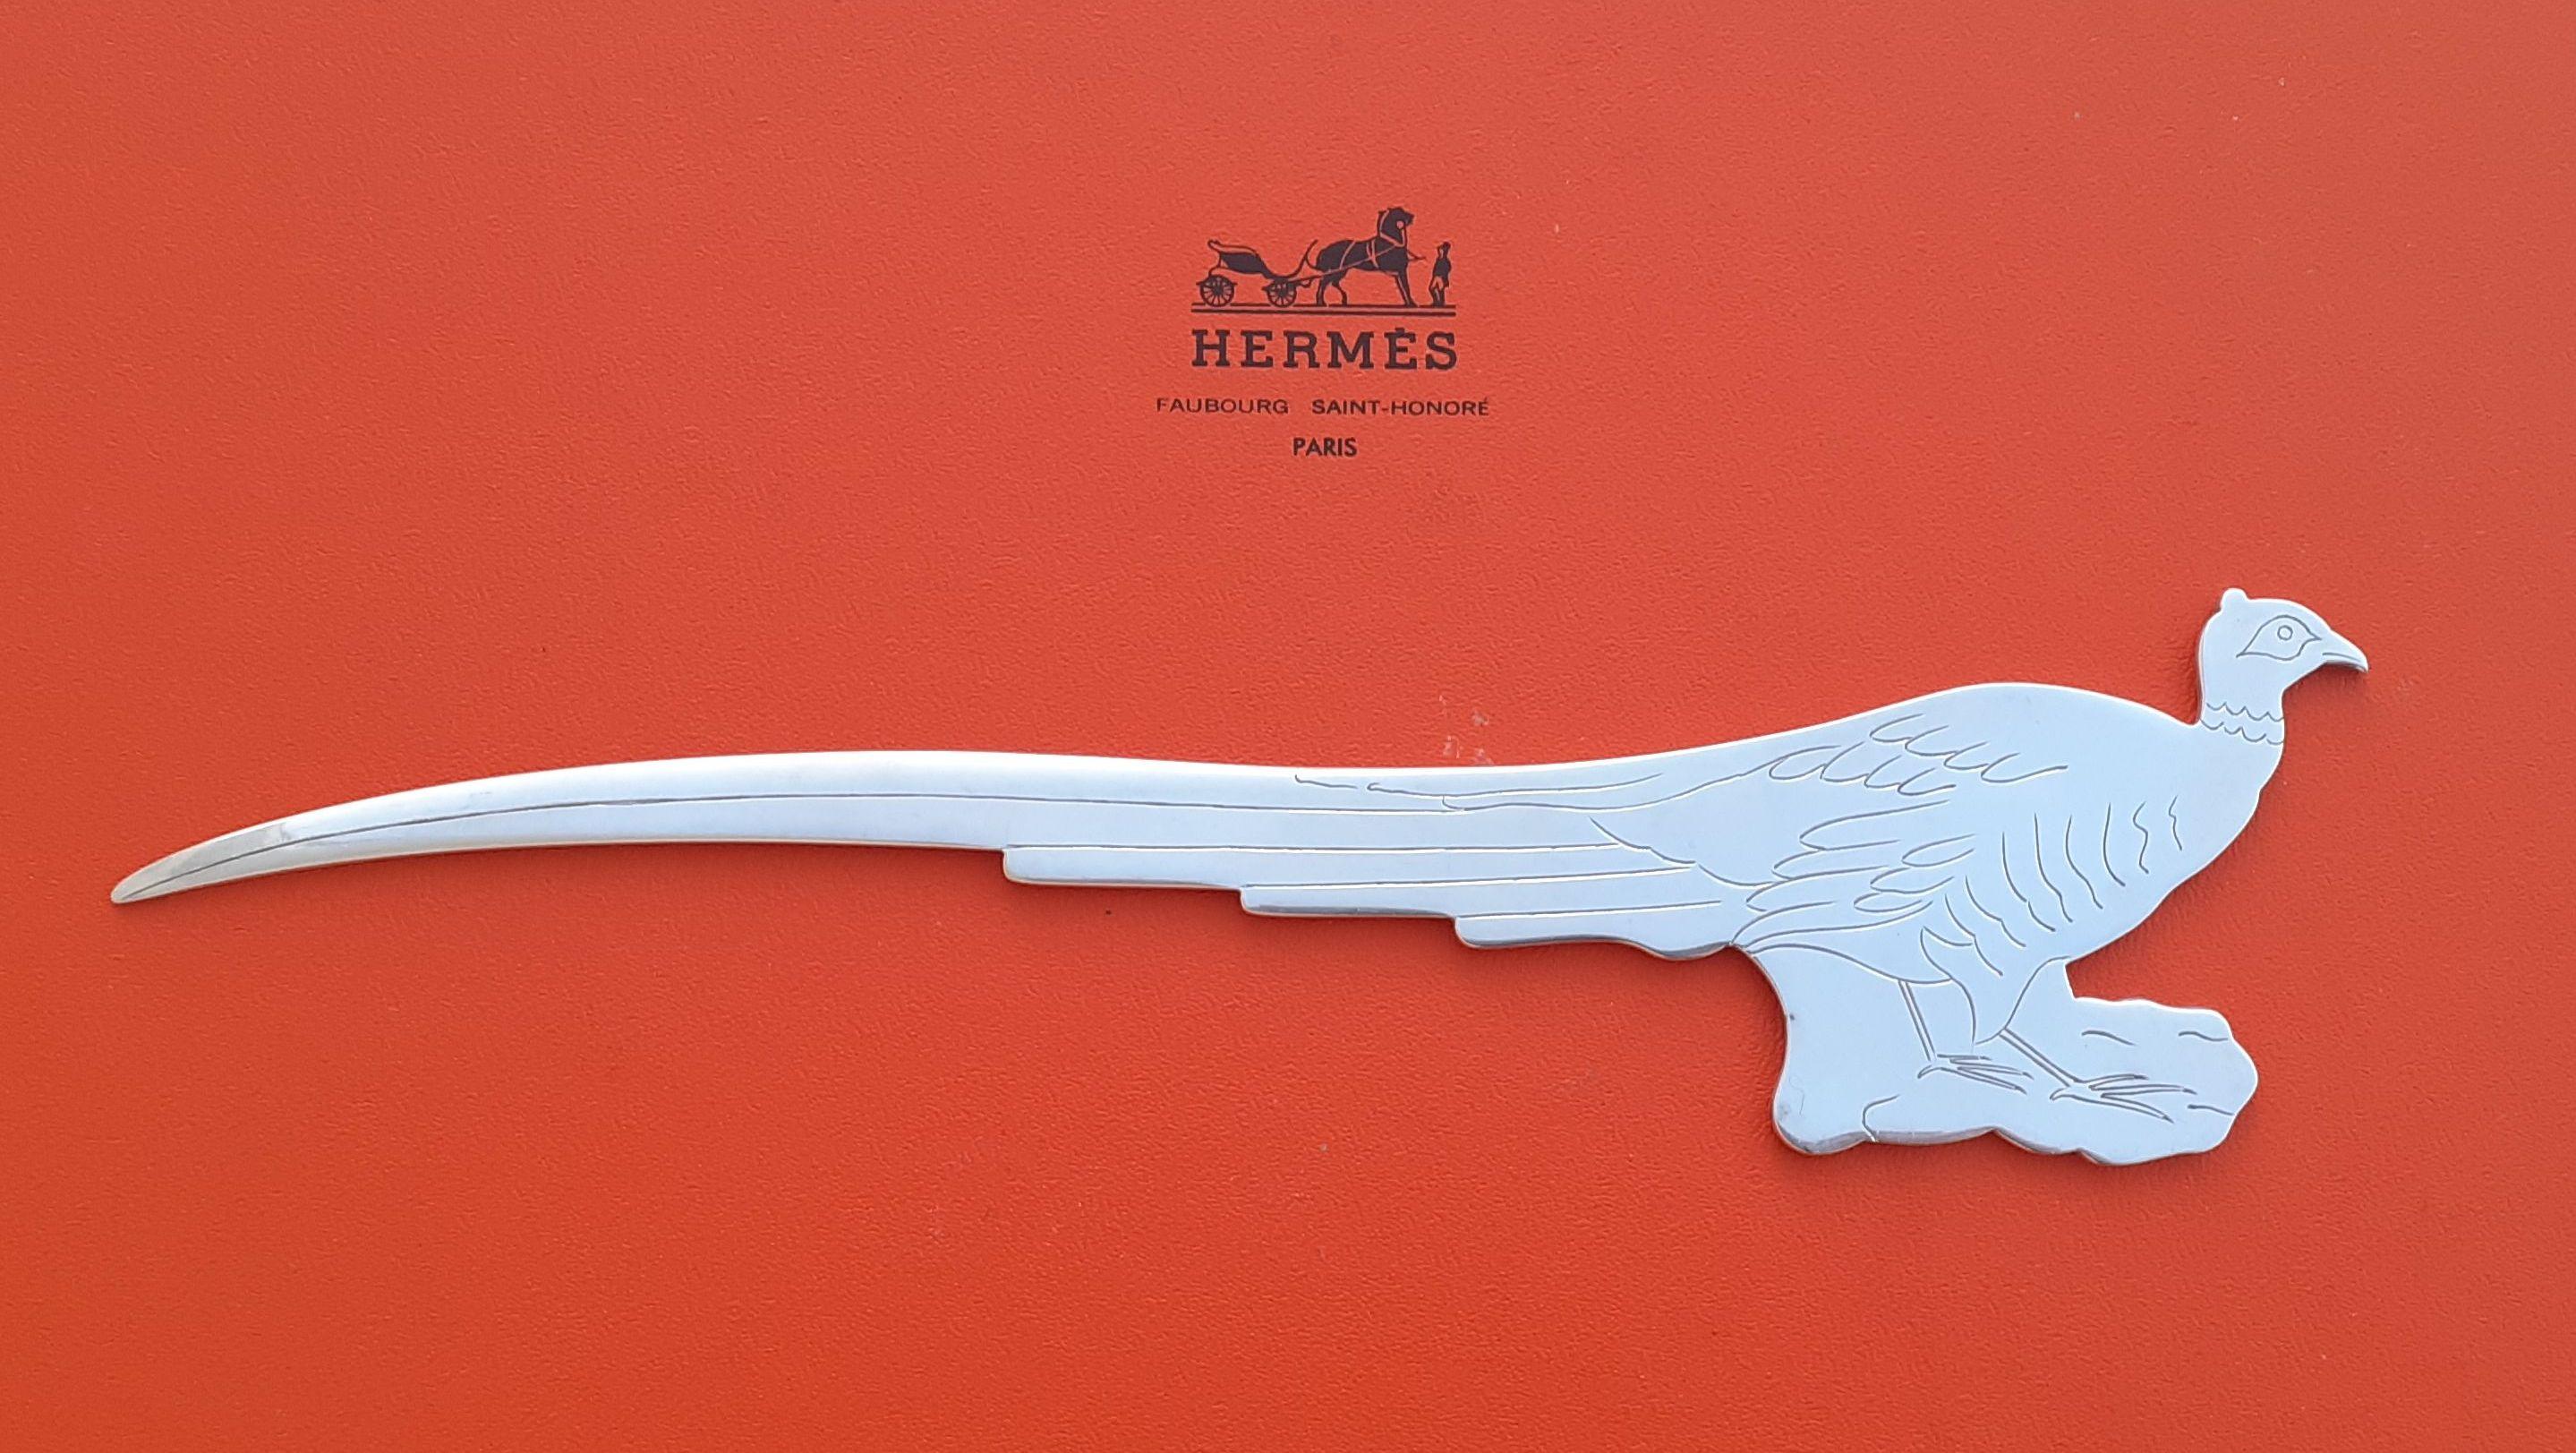 Extremely Rare Authentic Hermès Letter Opener

Absolutely stunning, a rare collector item

Pheasant shaped

Vintage Item 

Made of metal (non precious)

Colorway: silvery

